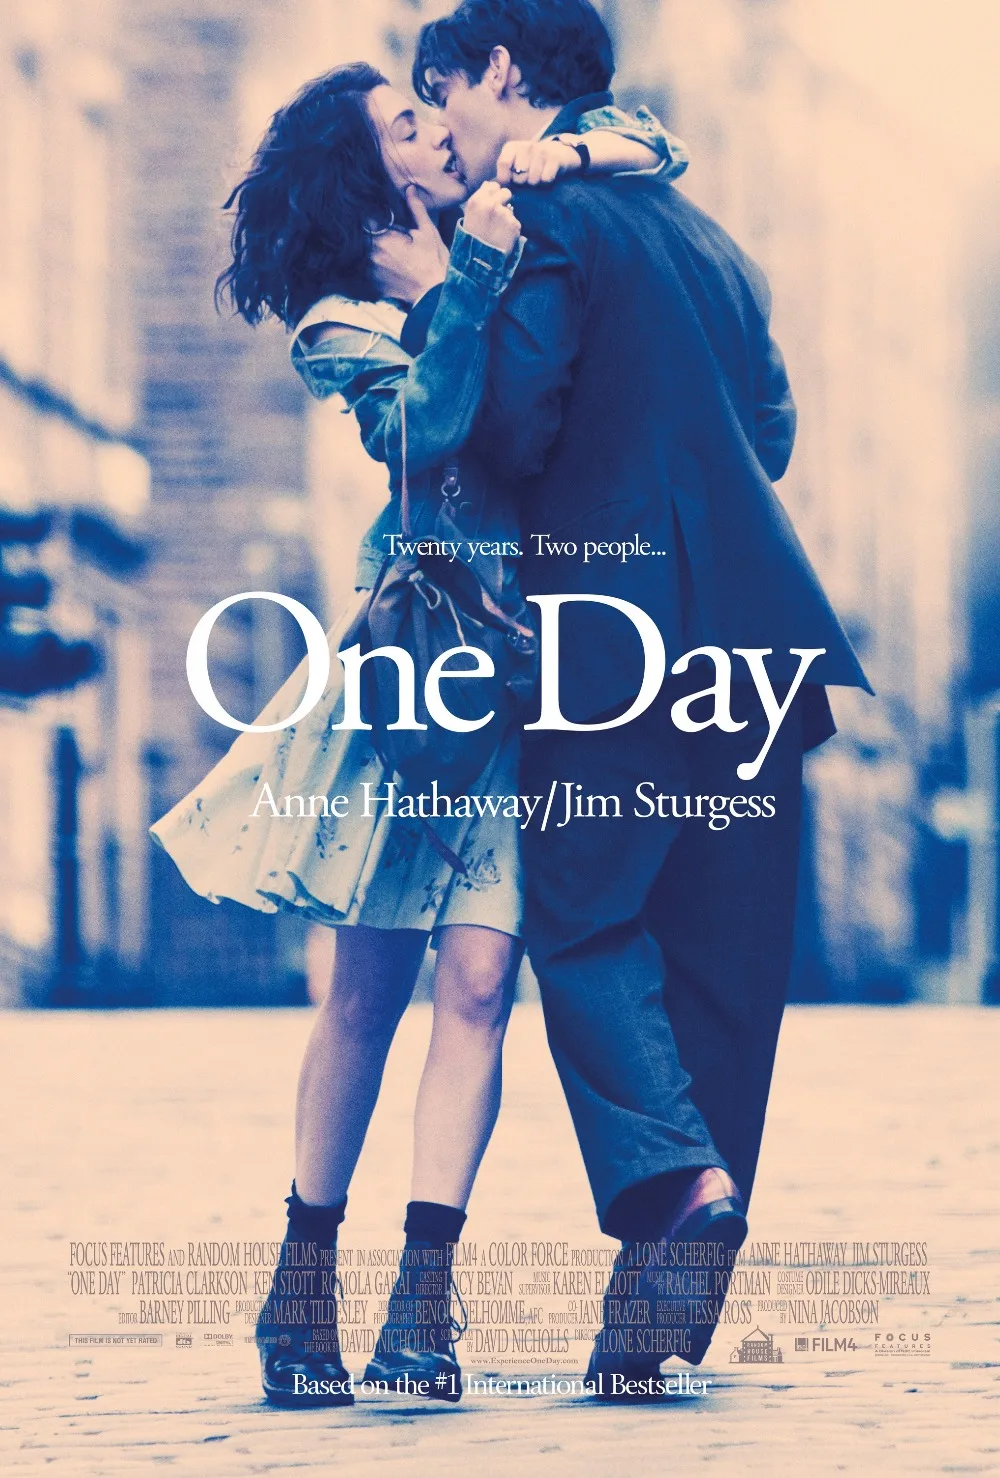 

One Day Anne Hathaway Jim Sturgess Movie Poster Love movie Posters And Prints Vintage Home Decoration Picture For Wall No Frame